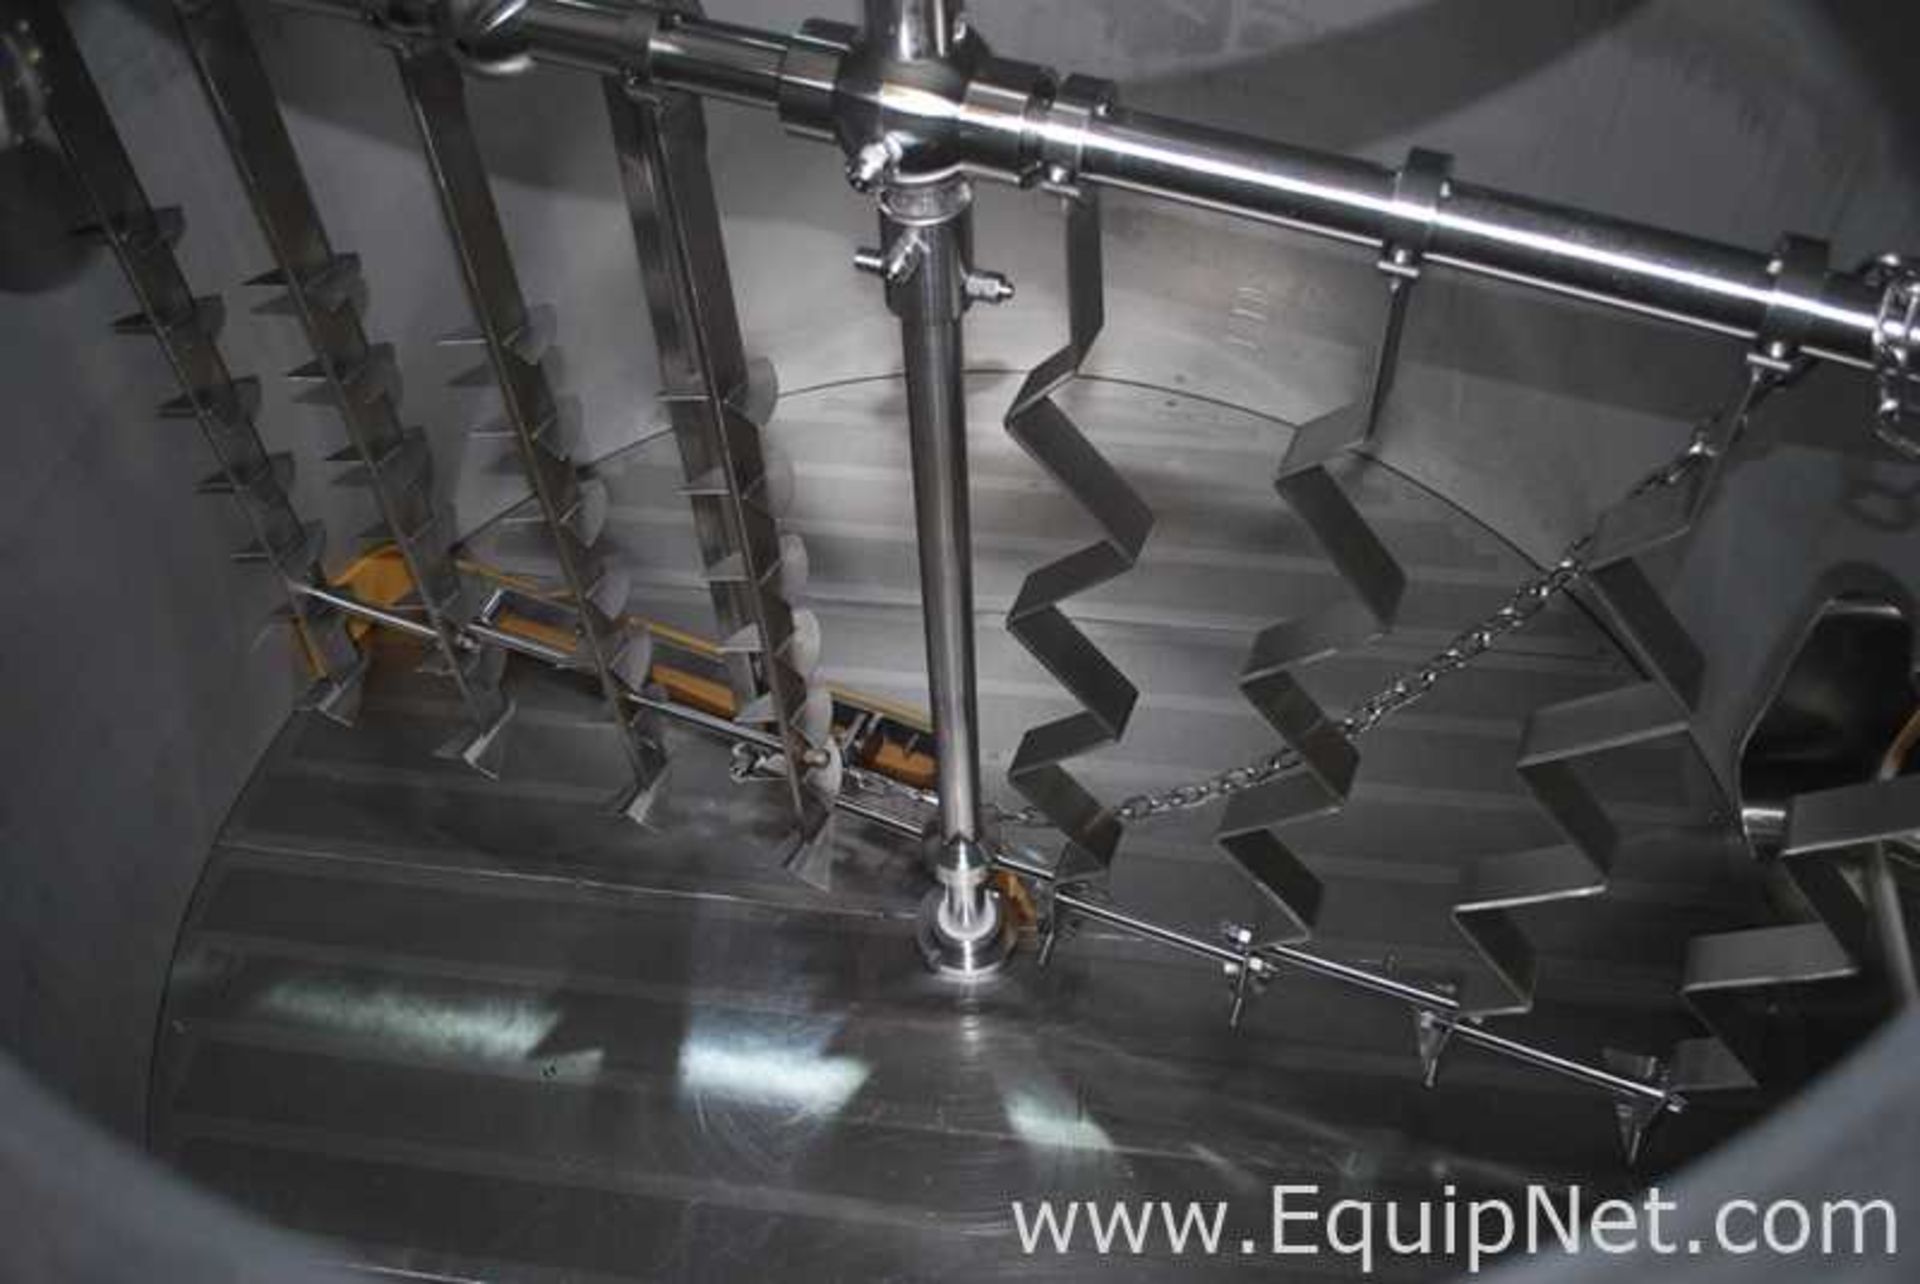 Brew House Sytem with Three- 20 BBL Vessels Mash Tun|Lauter Tun|Whirlpool-Boil Kettle - Image 4 of 10